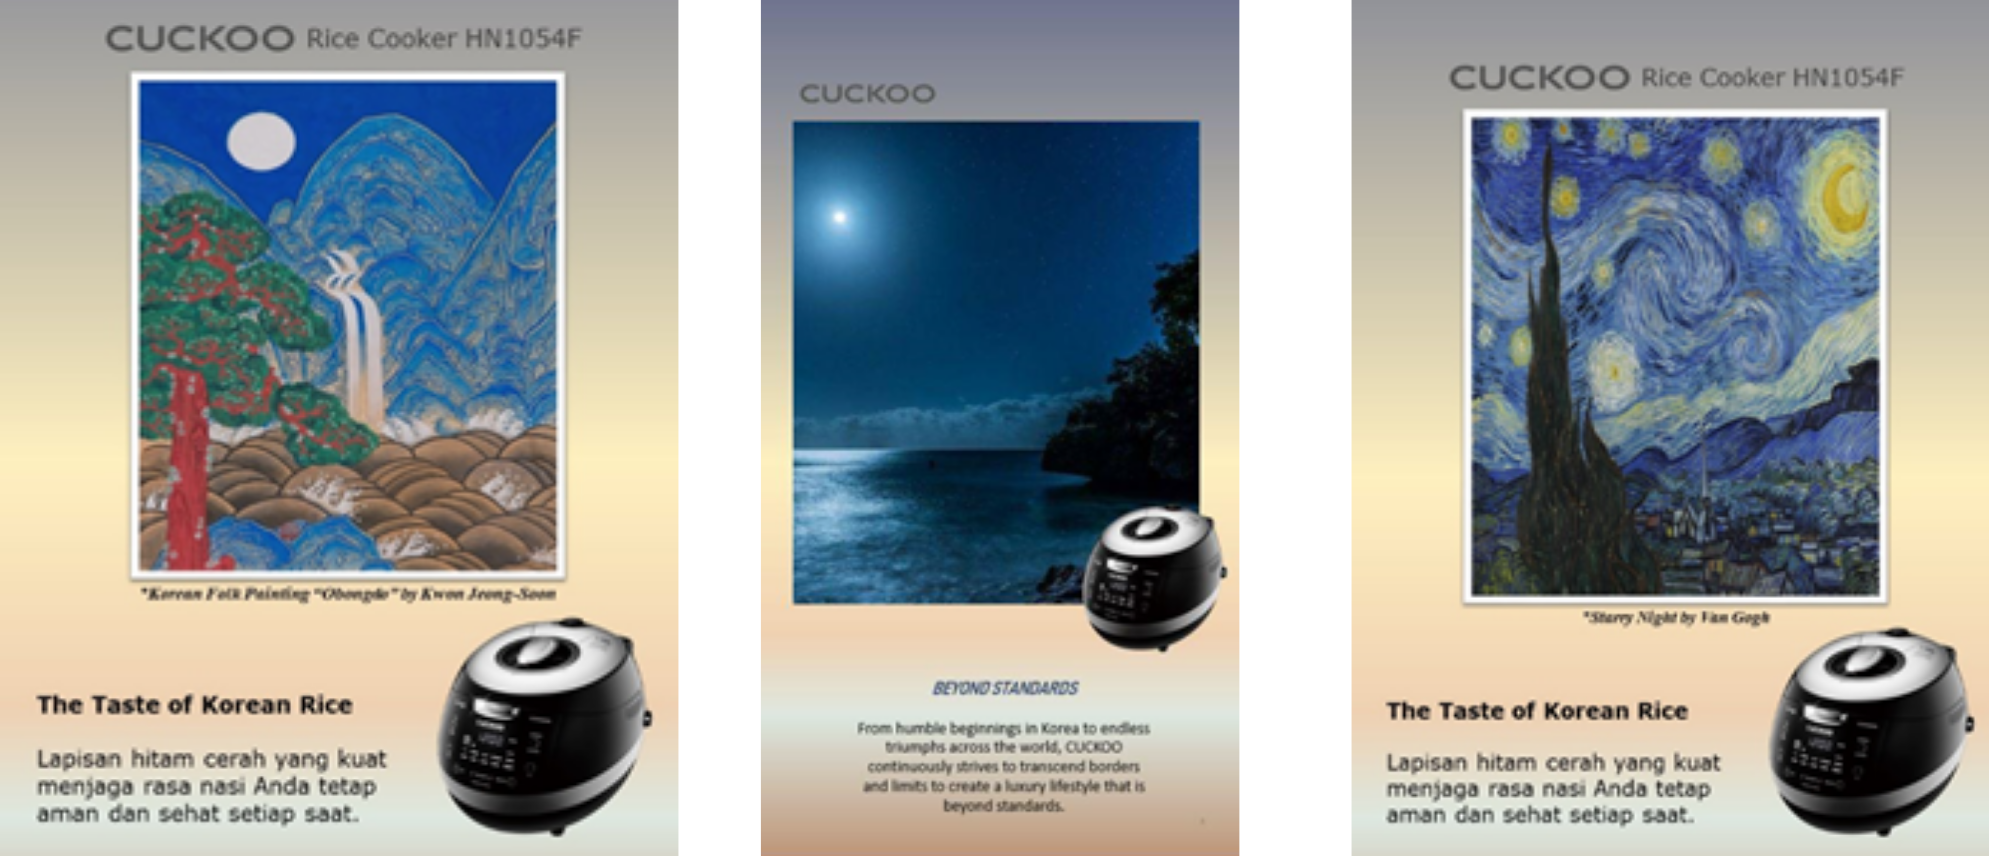 Three similar advertisements advertise the same rice cooker: one with a Korean style evening moon and waterfall scene, one with a photo of the moon shining over a coastline, and one with van Gogh's Starry Night  